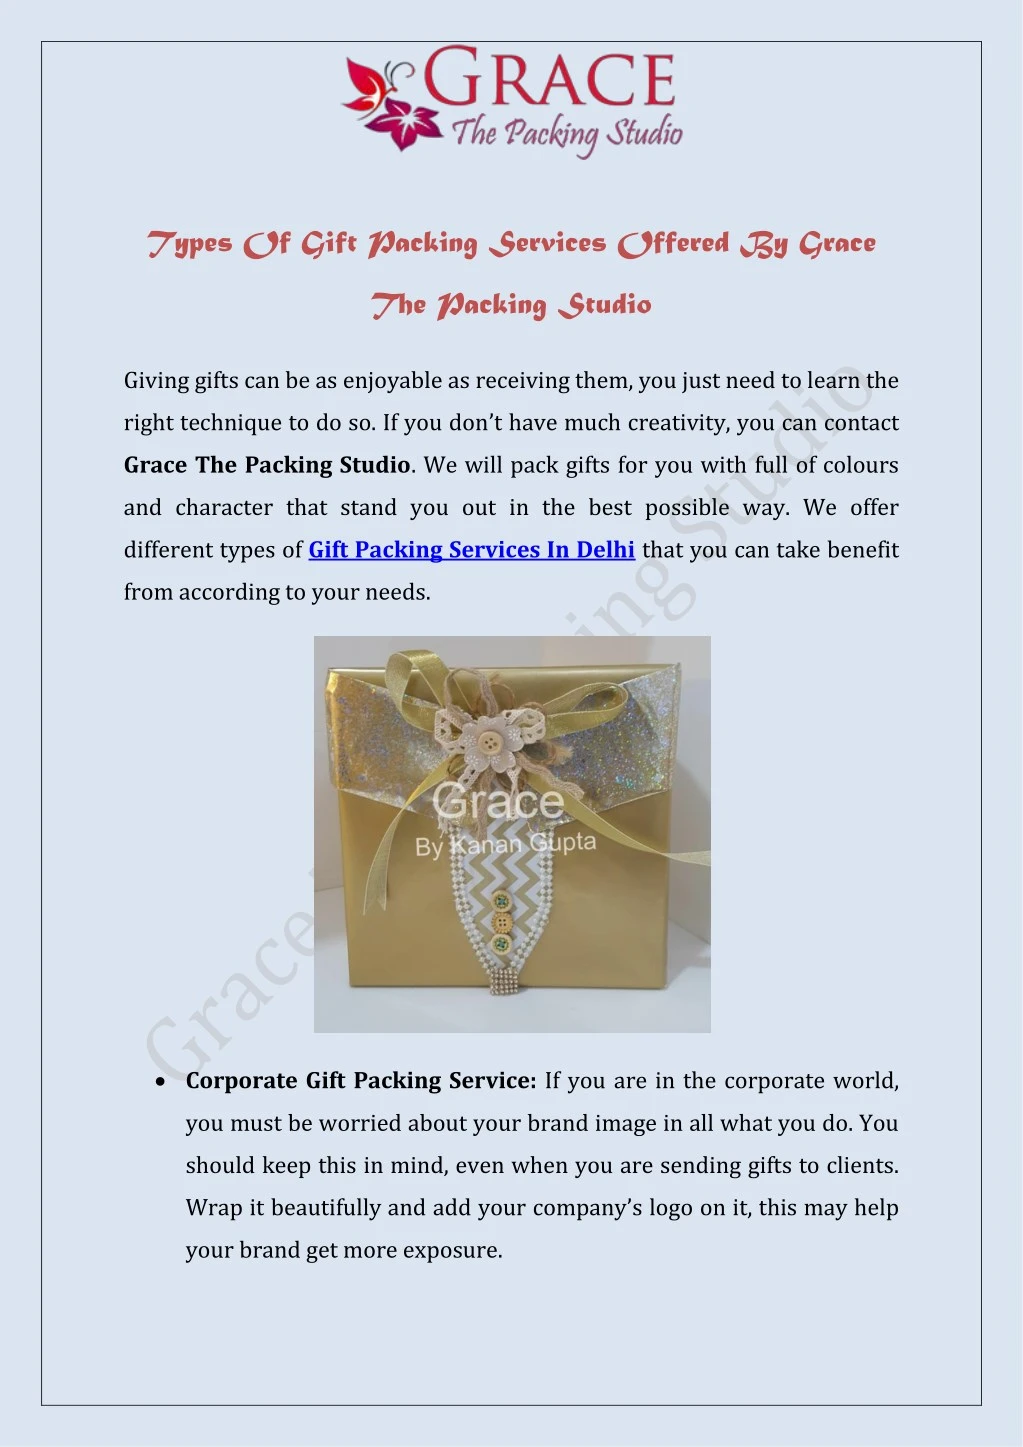 types of gift packing services offered by grace n.